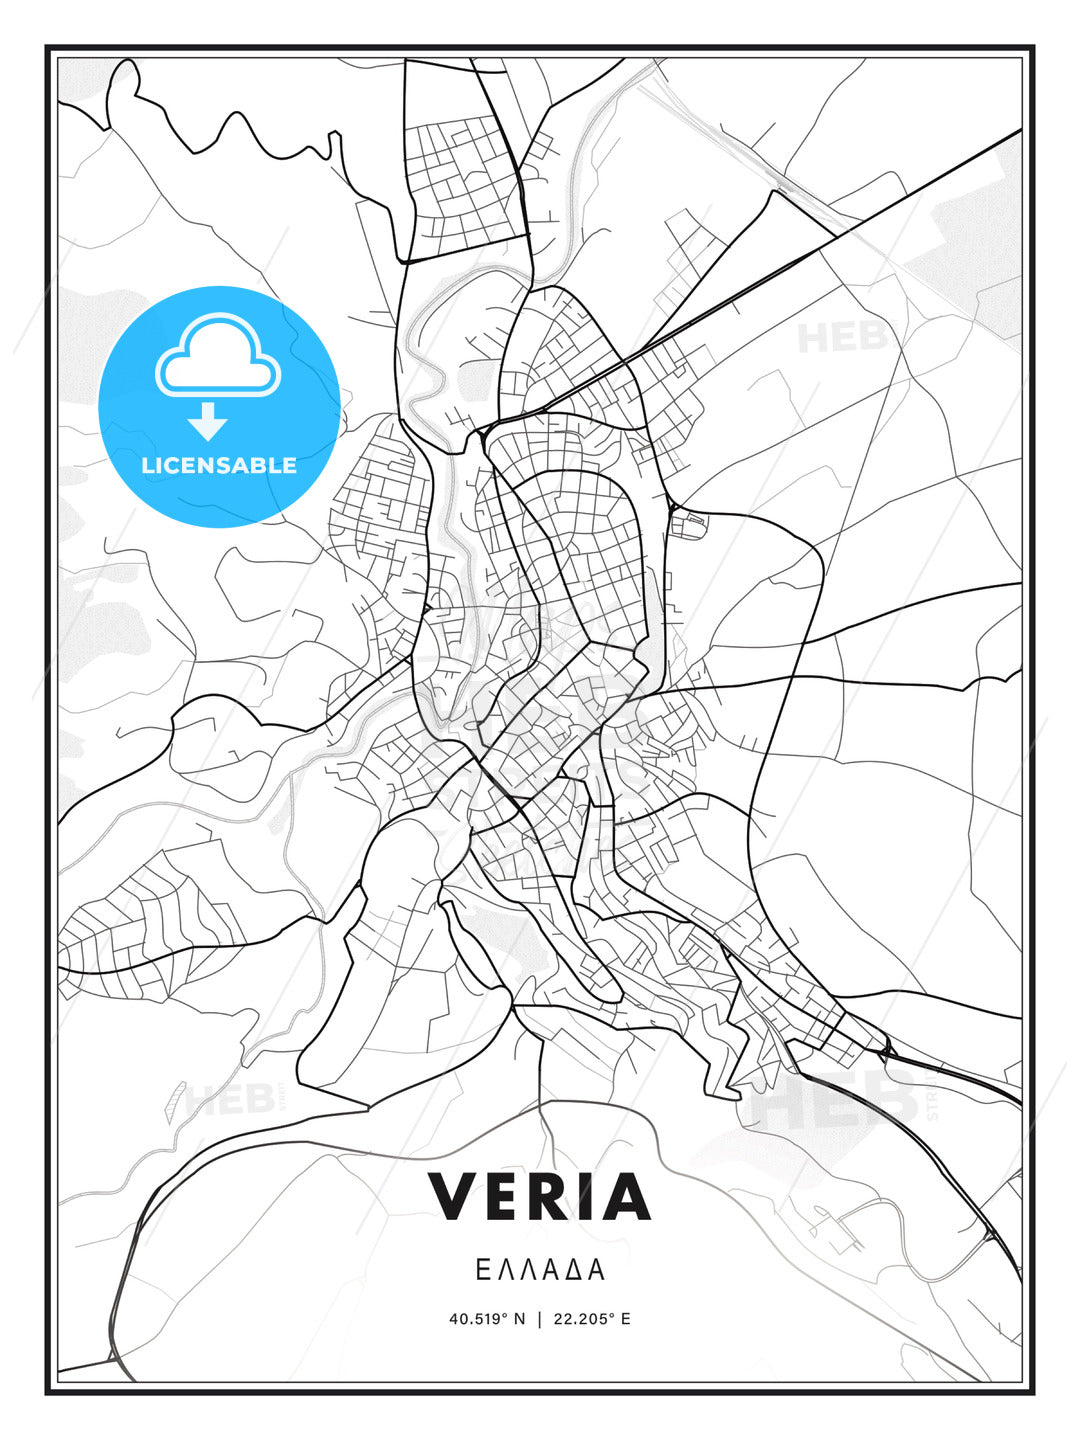 Veria, Greece, Modern Print Template in Various Formats - HEBSTREITS Sketches